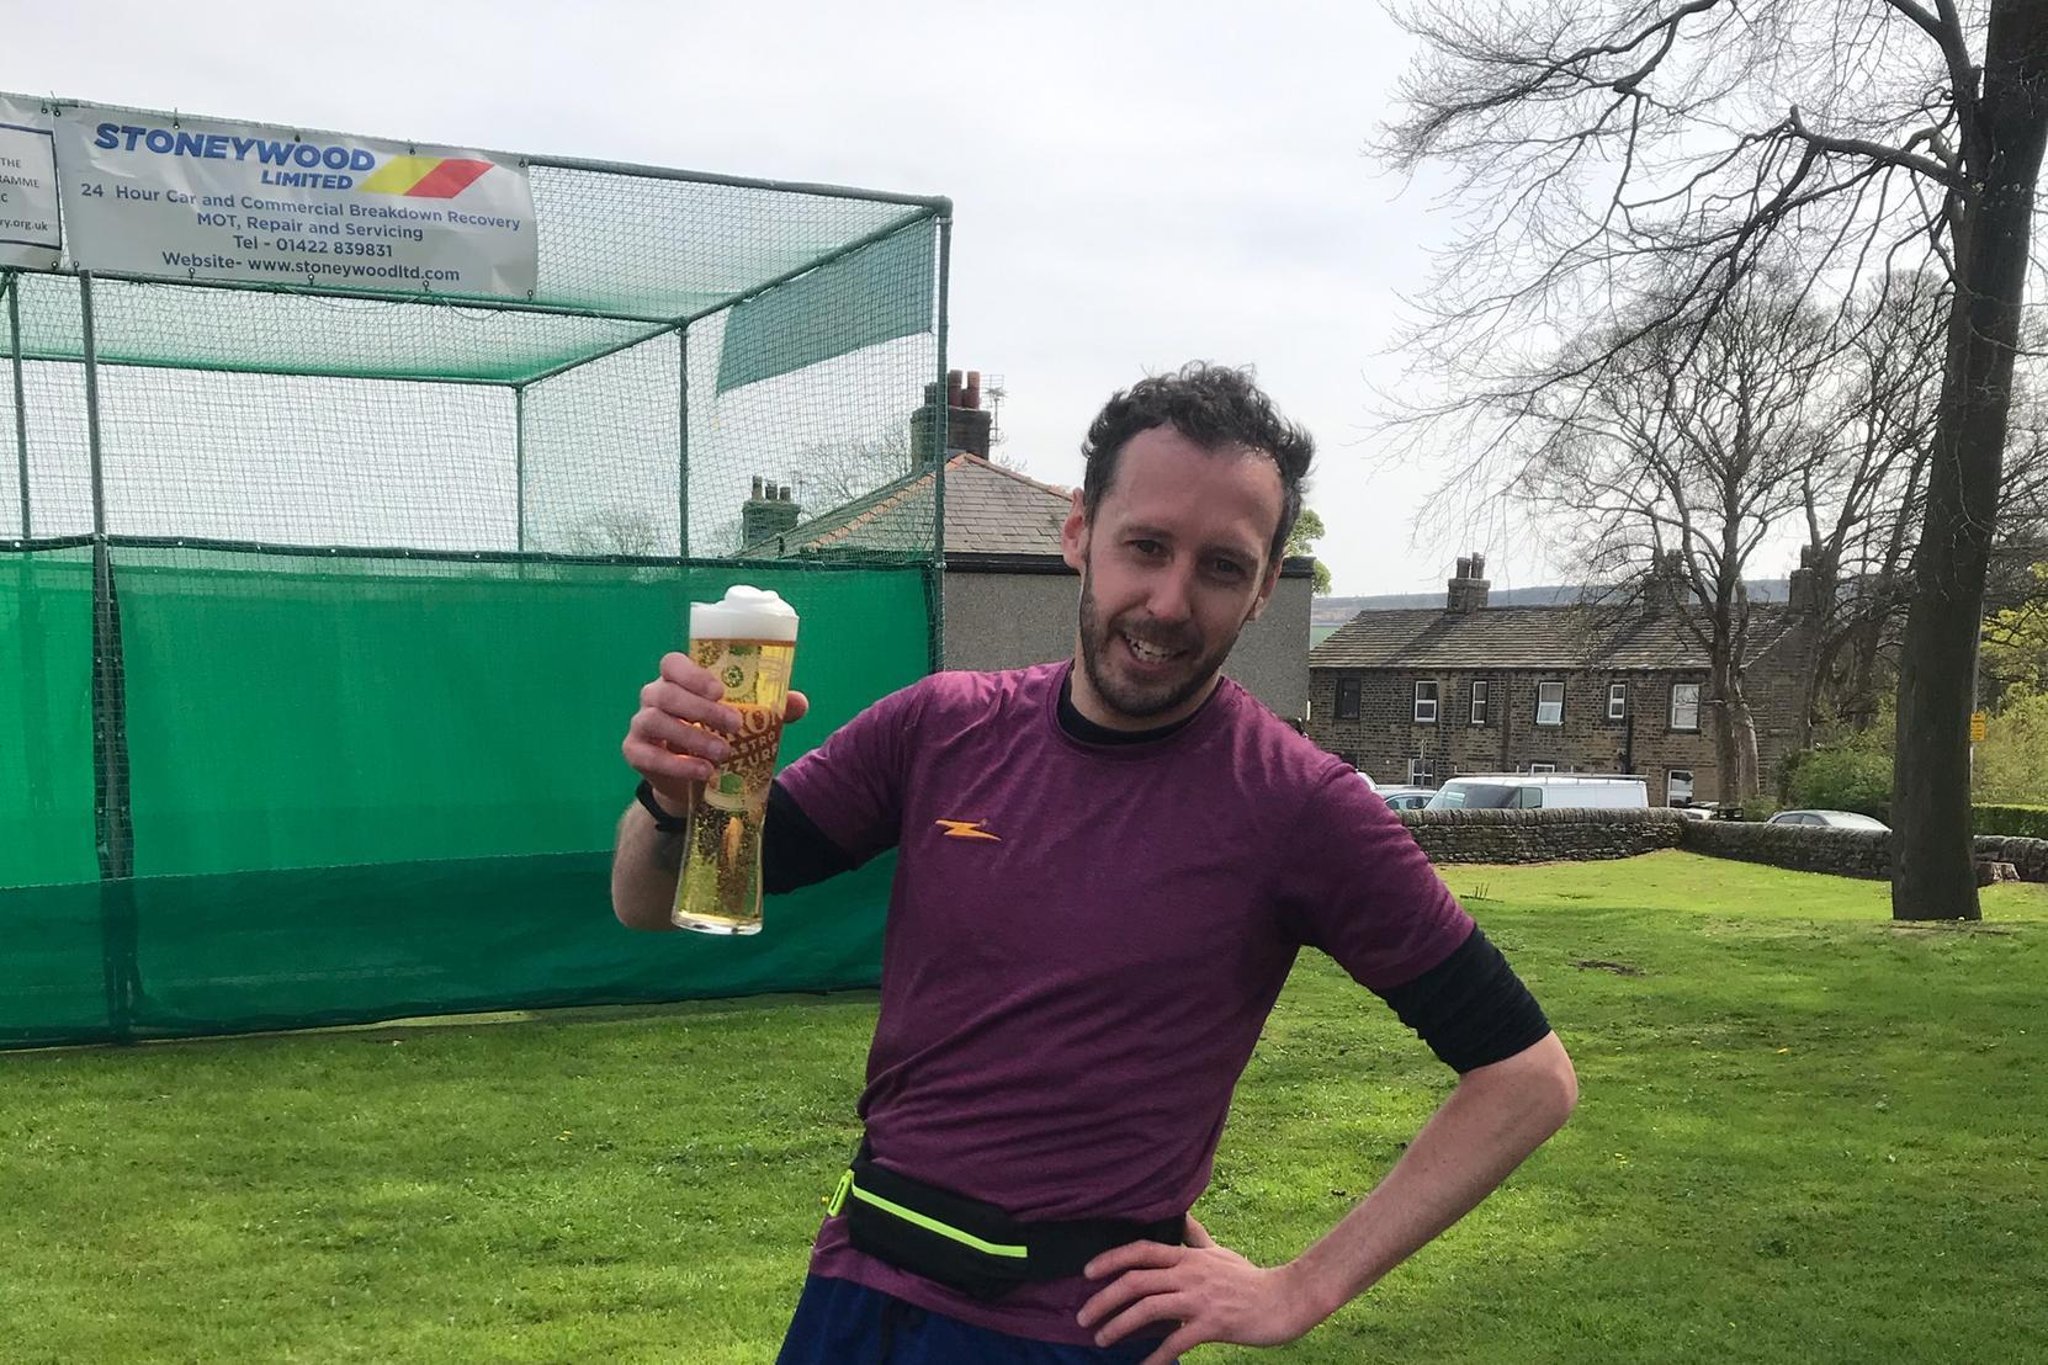 Cricket club captain completes 18 mile fundraising run around Calder Valley clubs